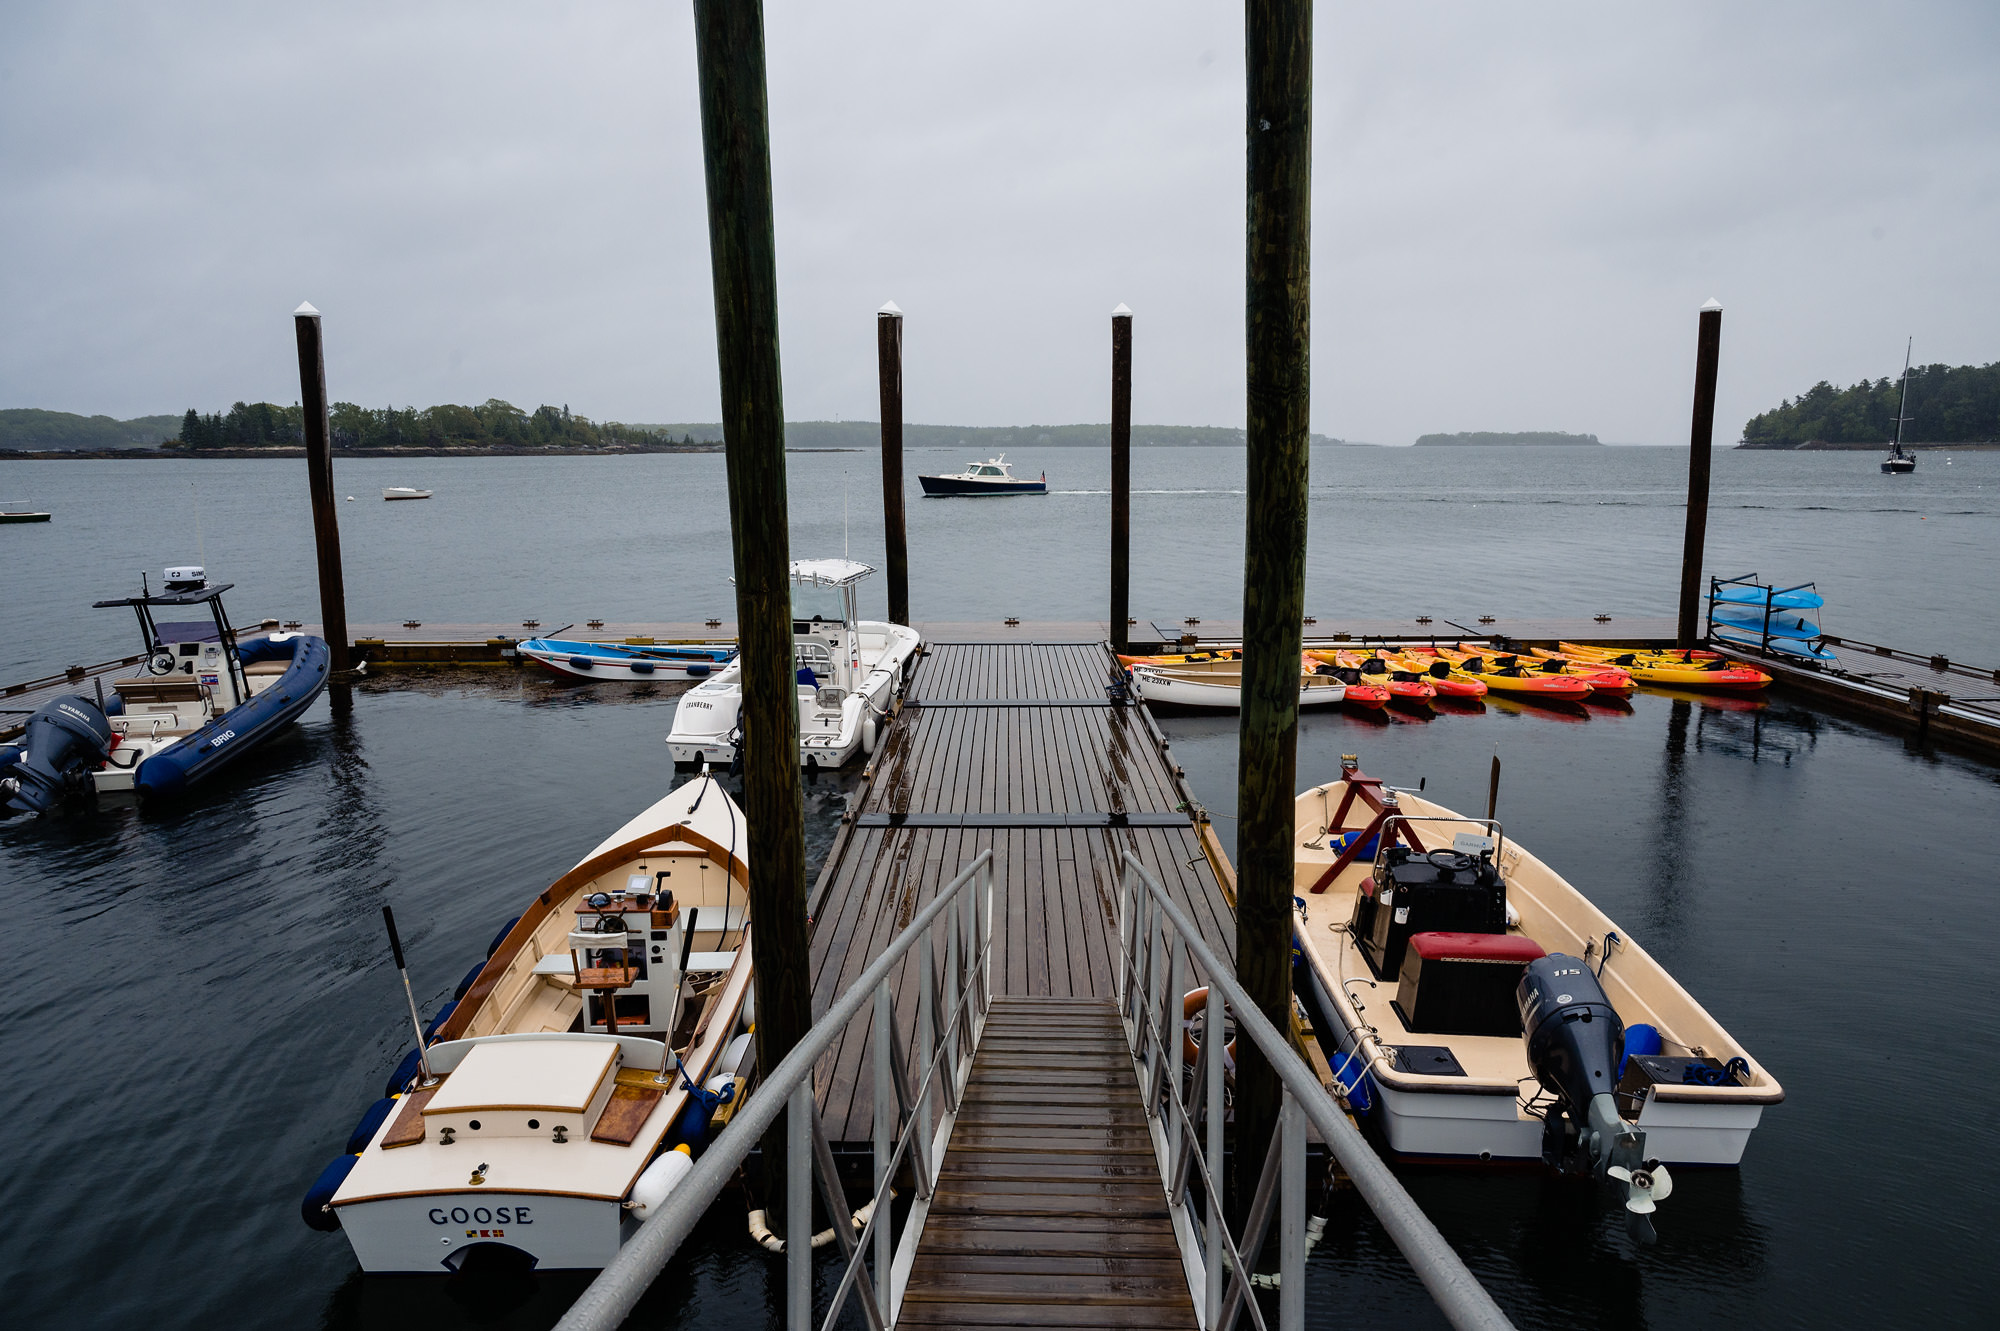 A rainy boat ride at a Boothbay Harbor Maine wedding